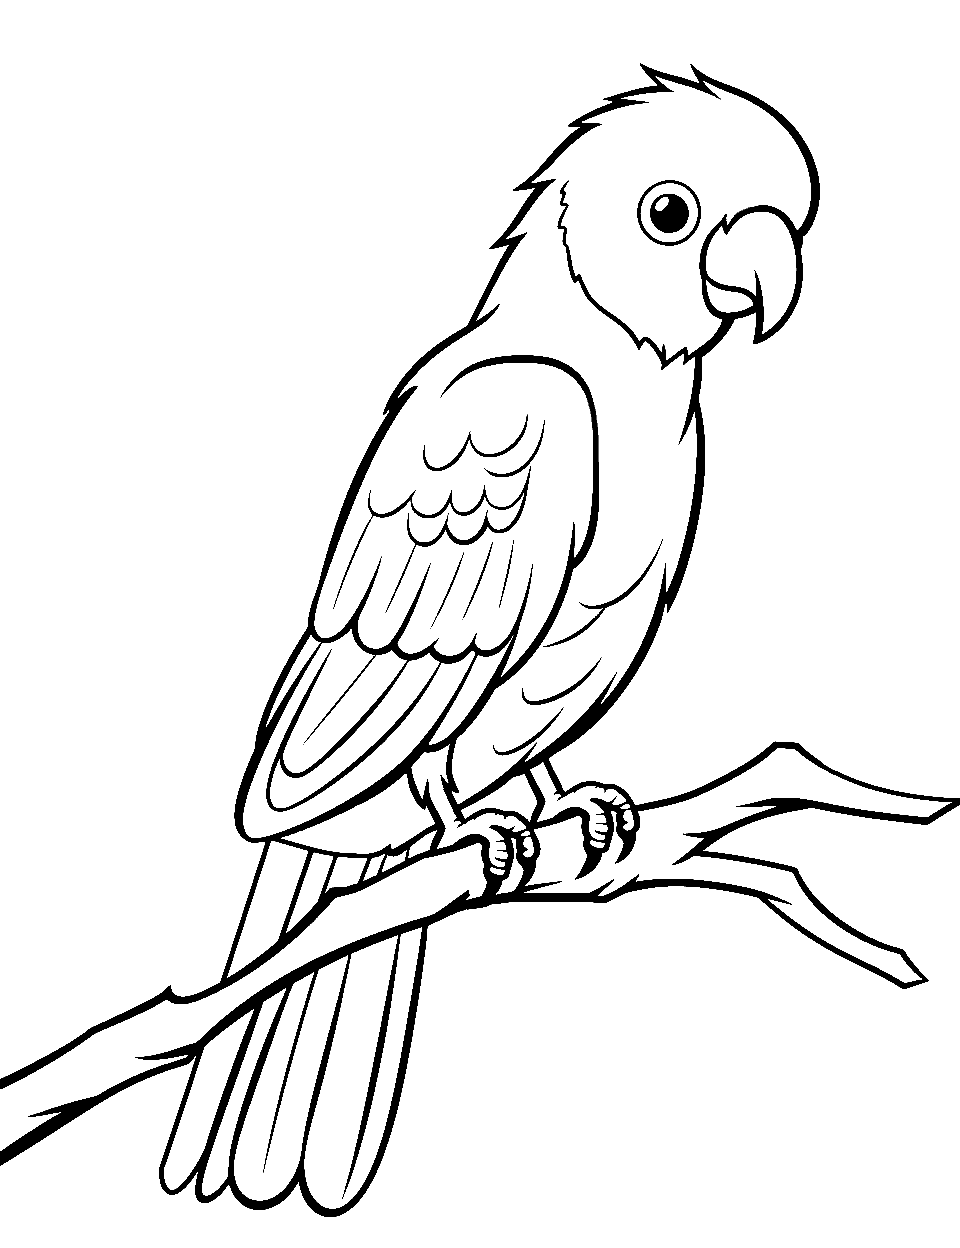 Parrot on a Branch Coloring Page - A colorful parrot perched confidently on a branch.